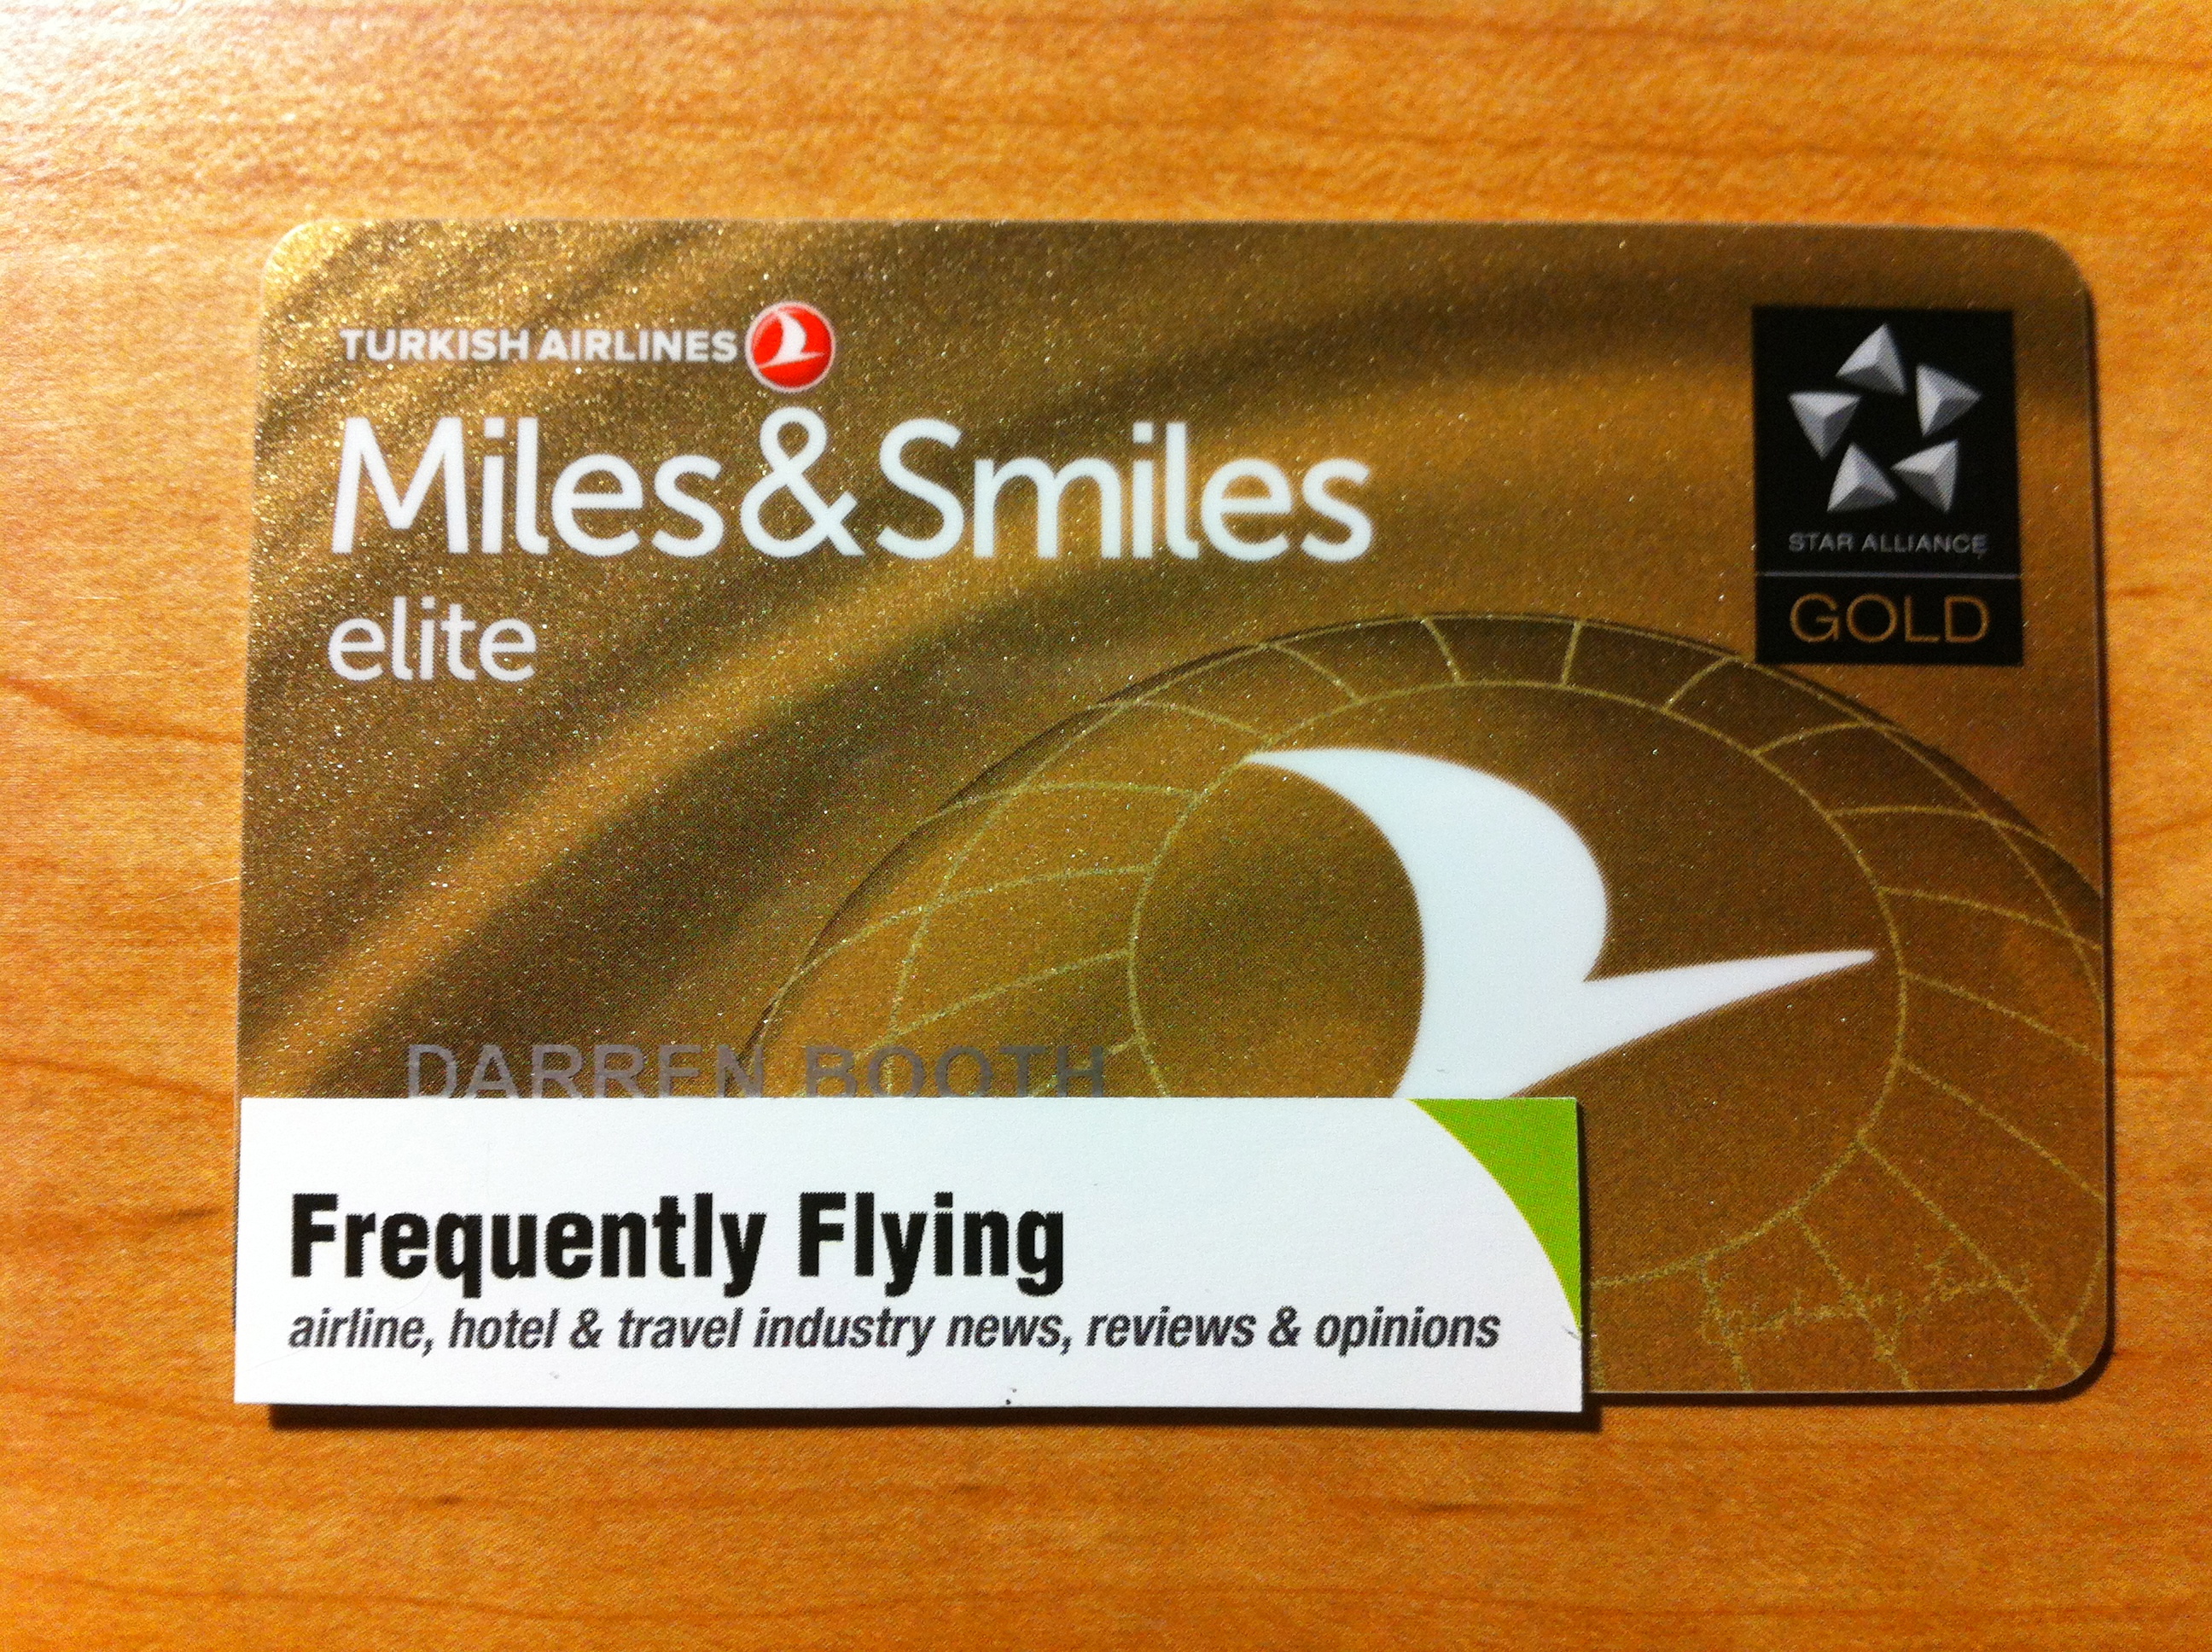 Airline miles. Miles and smiles Turkish Airlines. Карта Miles and smiles. Star Alliance Gold. Turkish Airlines карта лояльности.